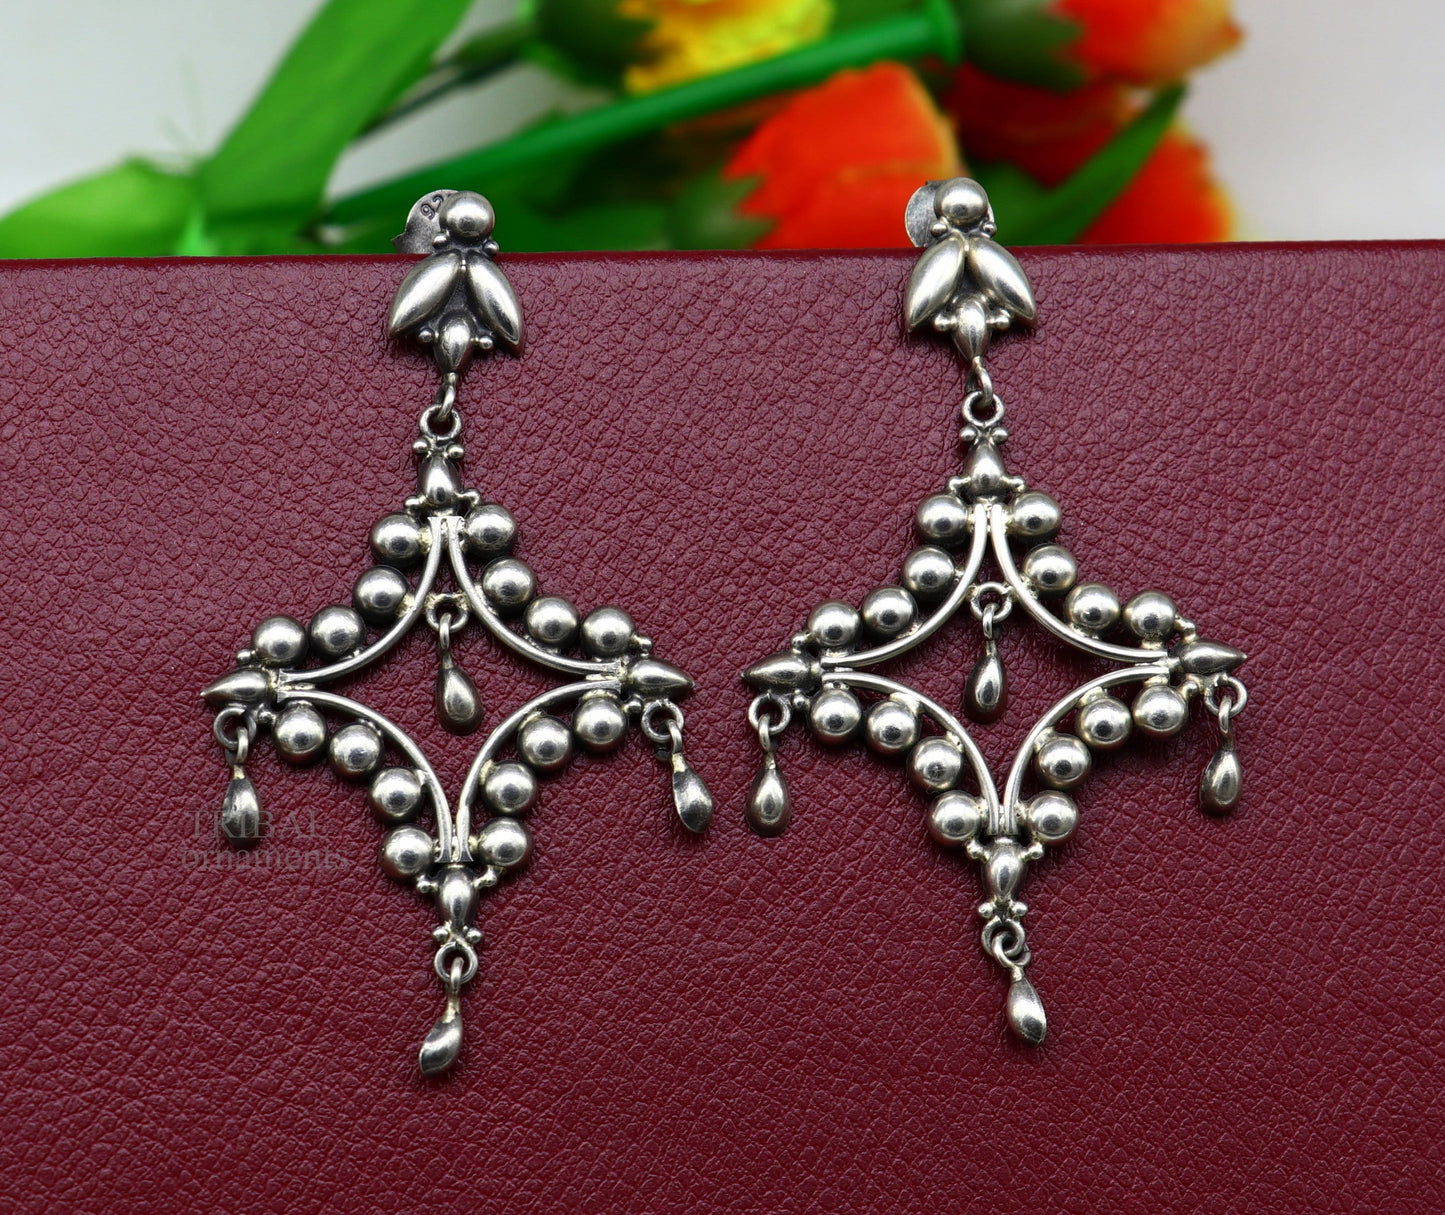 Vintage antique design handmade 92.5 sterling silver gorgeous vintage stylish stud earring fabulous light weight silver earrings ear1090 - TRIBAL ORNAMENTS